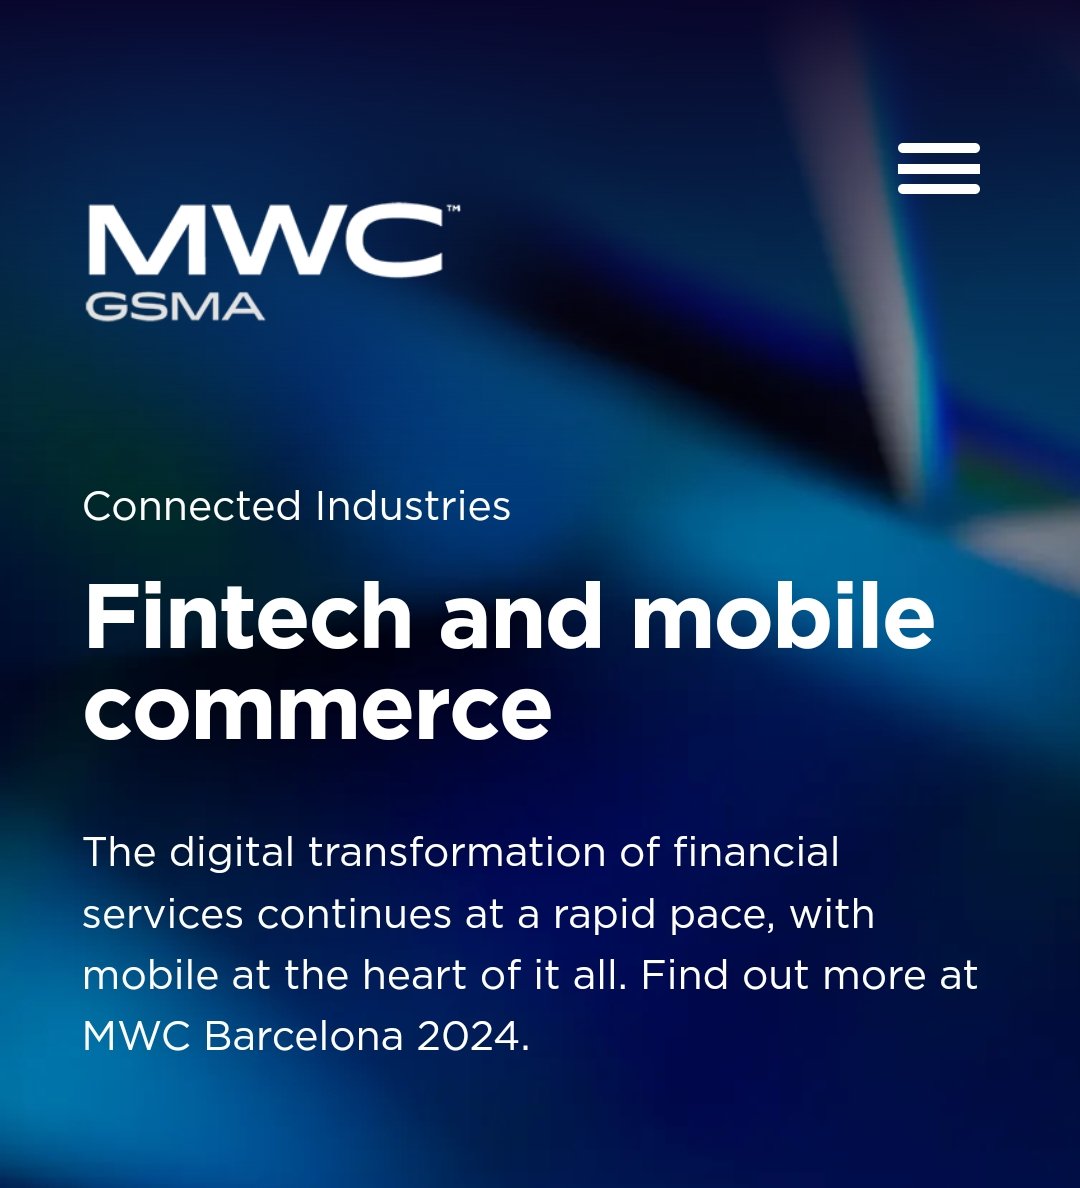 #Telcoin will again be exhibiting at #MWCBarcelona, the #GSMA flagship event next month. 

26-29 Feb, Telcoin will be at #MWC24 in the #4YFN24 section, where they had so much exposure last year. 

Excited for more detail on this - what news might come out there?

$TEL the 🌍